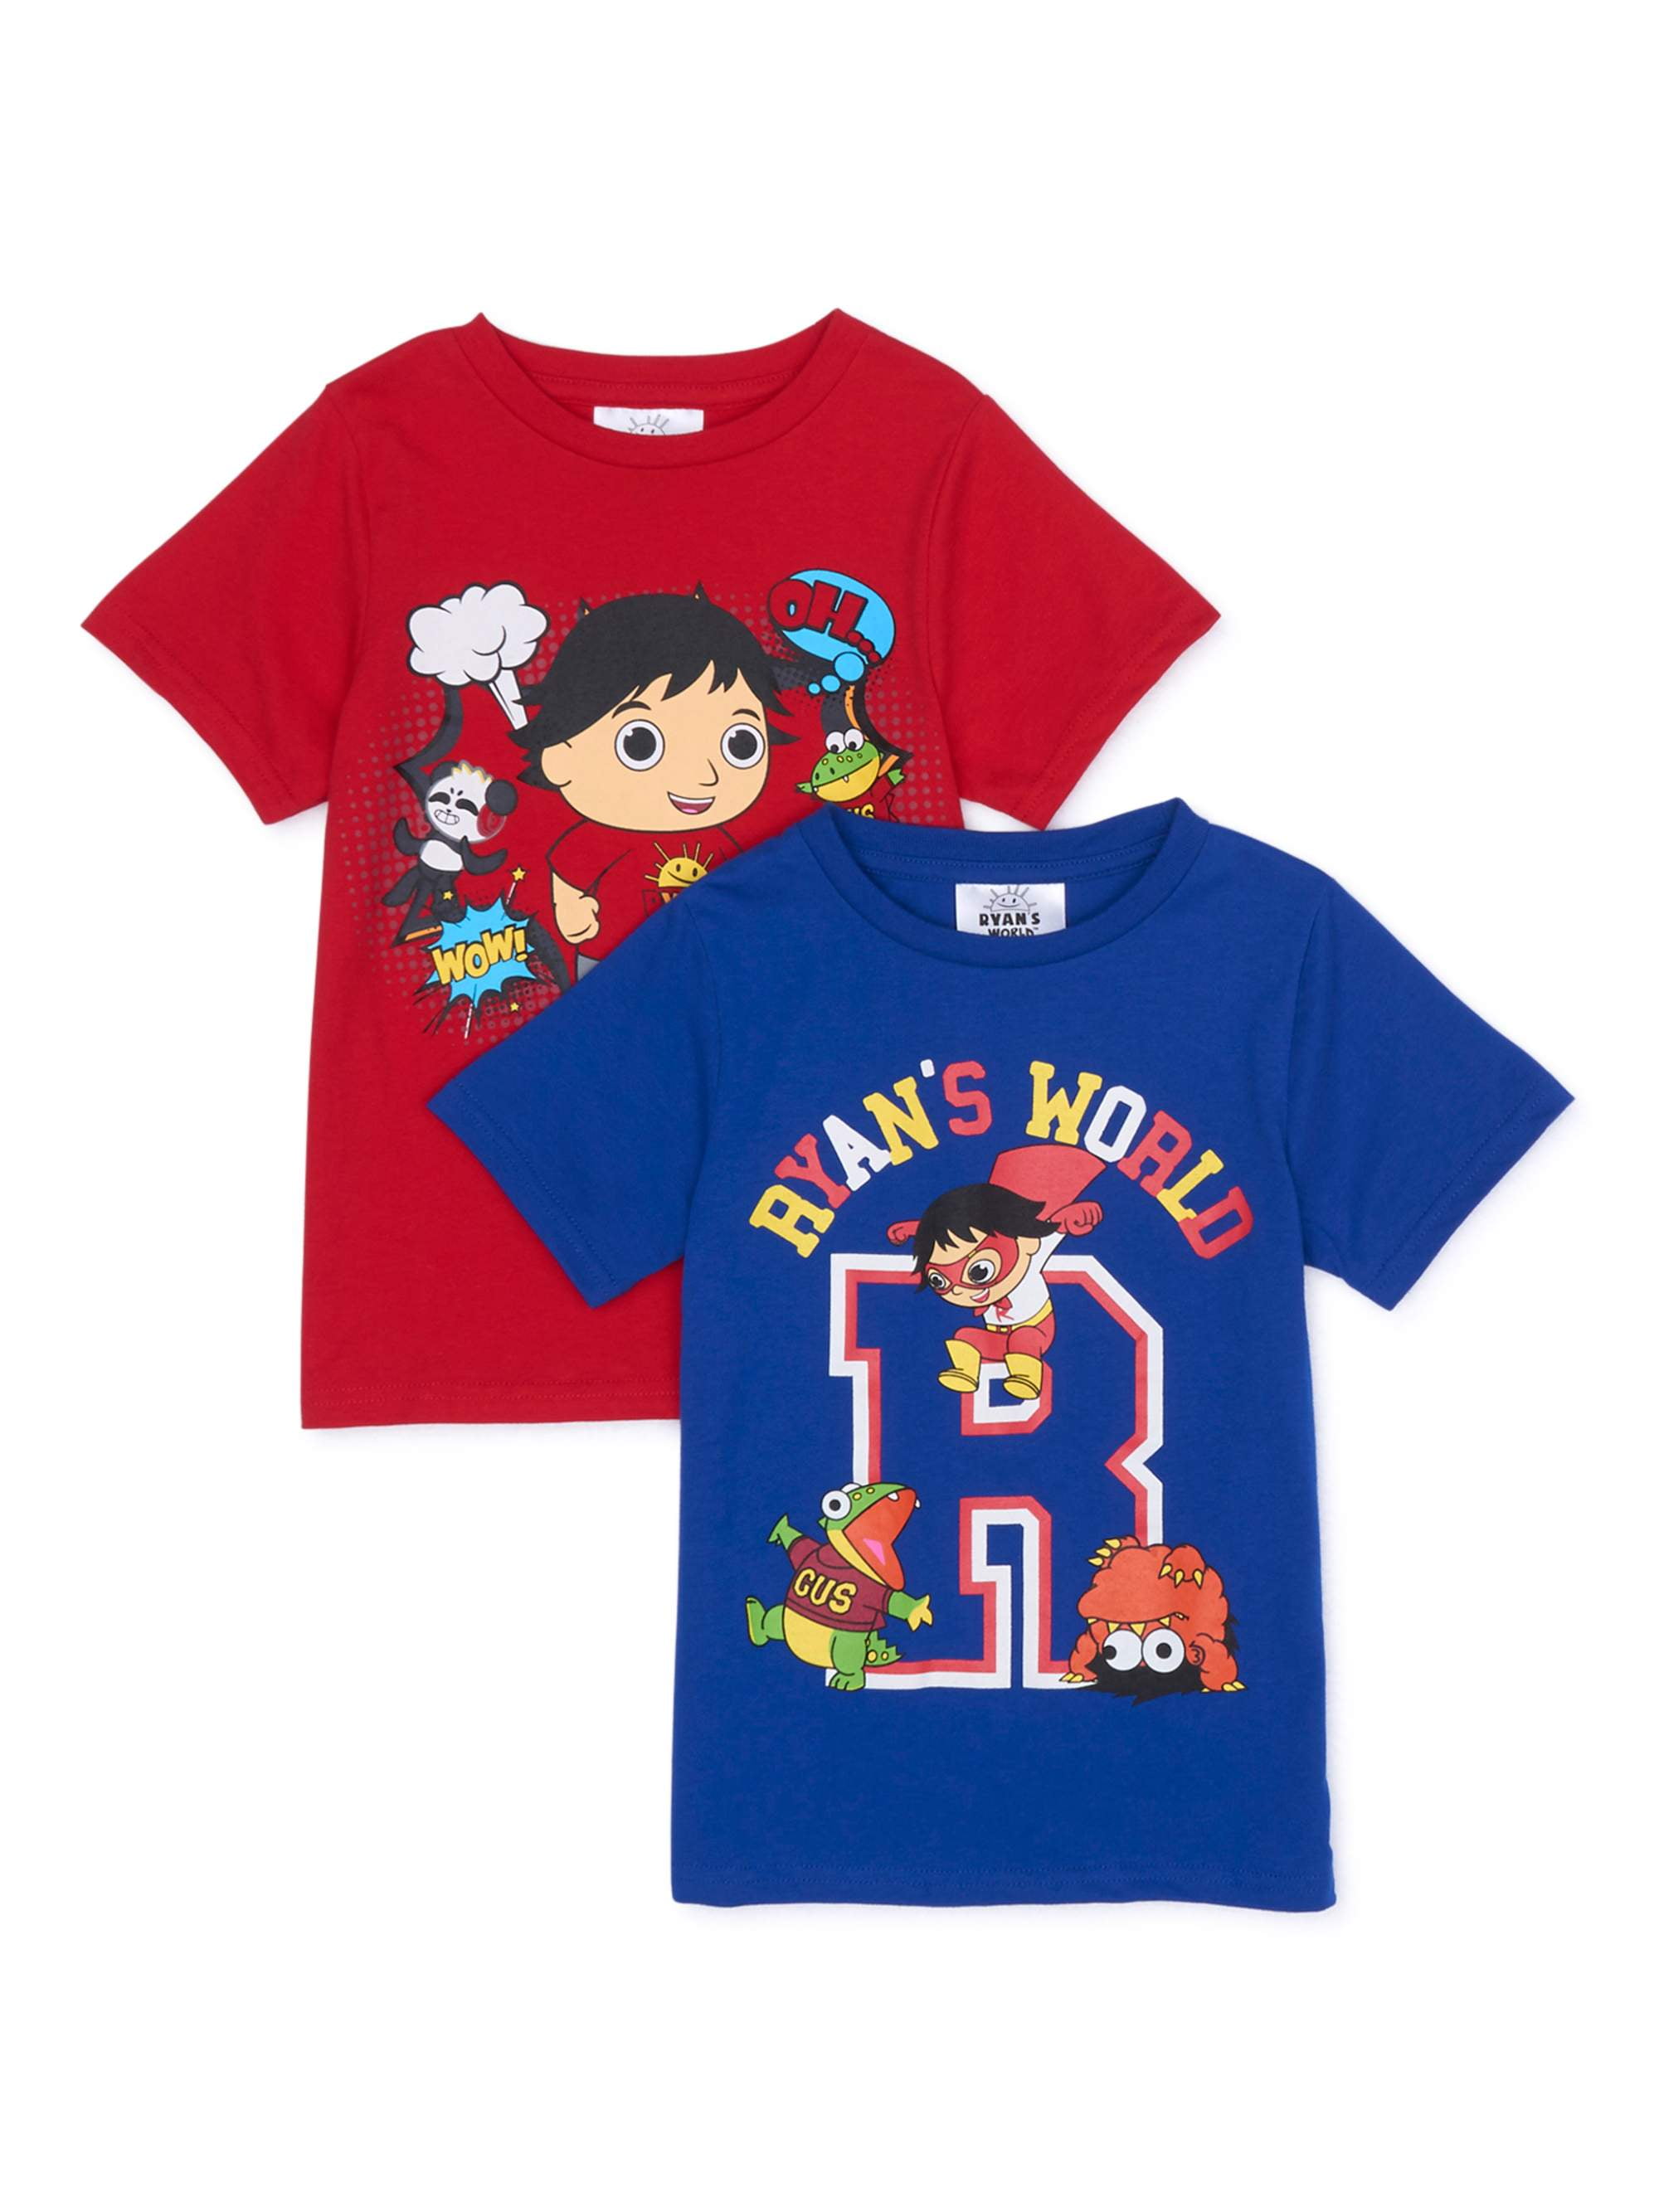 Ryans World Tshirt Red Titan And Gus Size 2T 